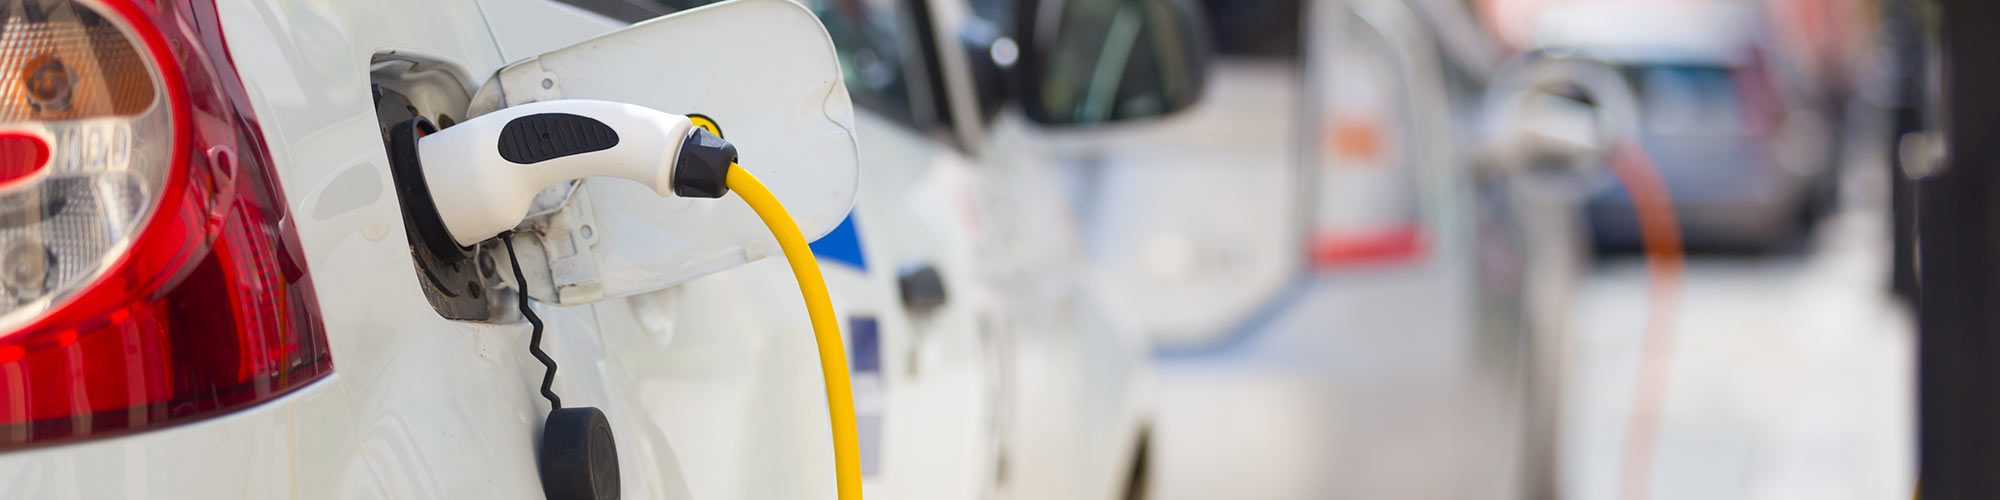 Enhancing the safety of electric vehicles